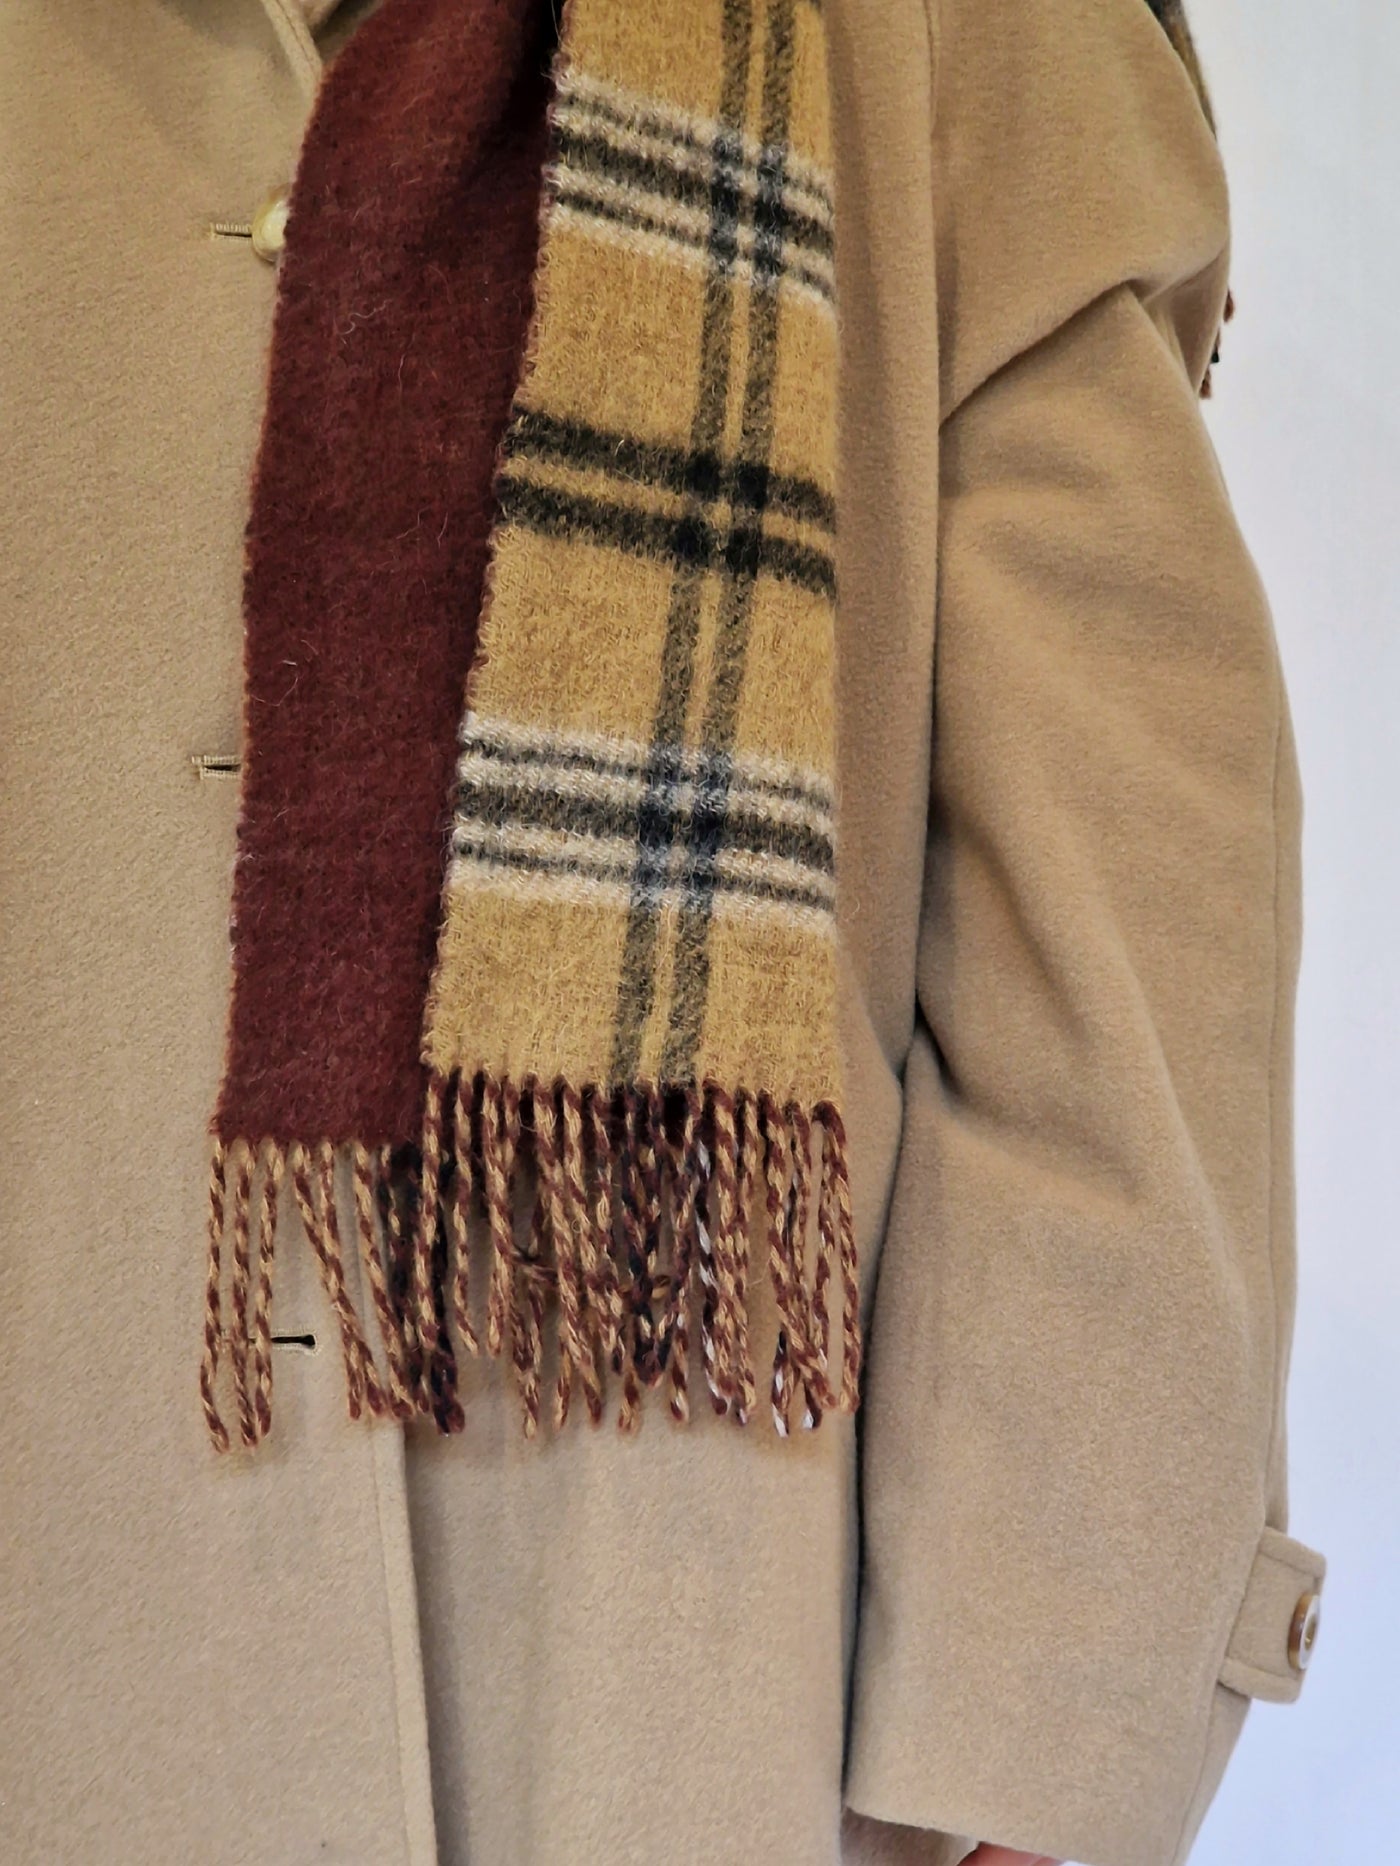 Vintage Burgundy and Camel Checked Wool Scarf